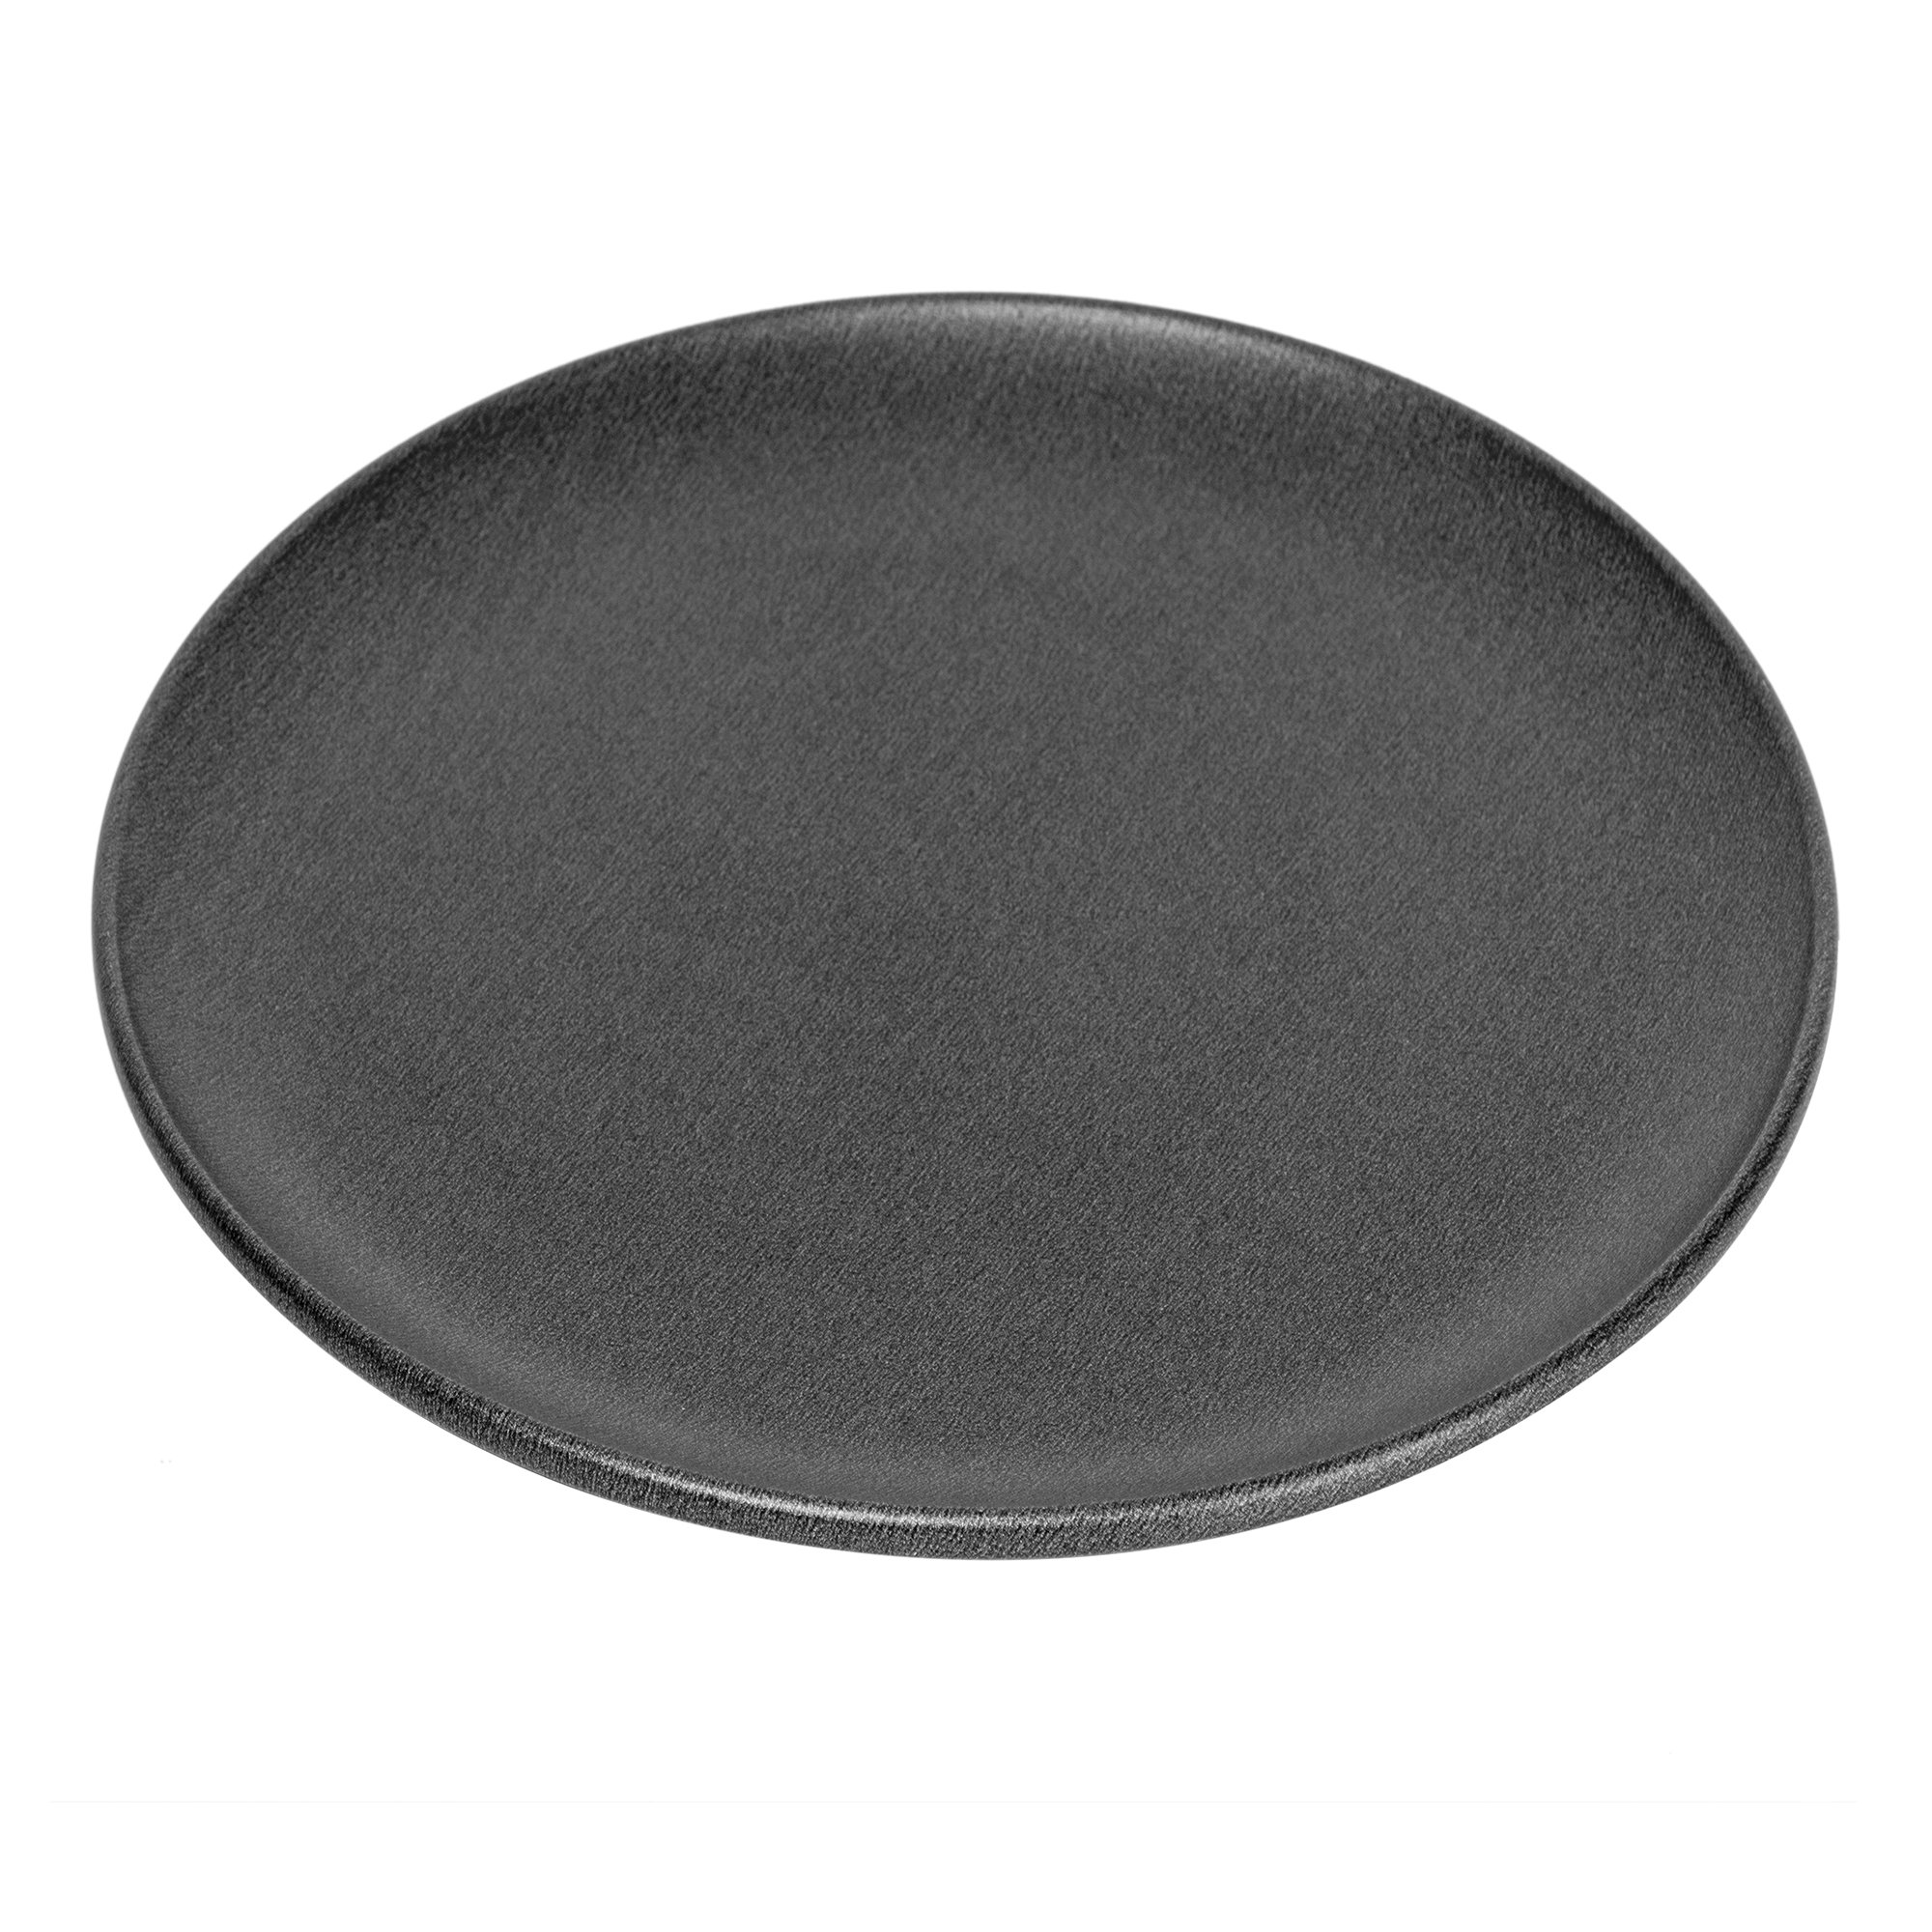 G&S Metal Products Company Nonstick ProBake Non-Stick Pizza Baking Pan, 16 inches, Charcoal